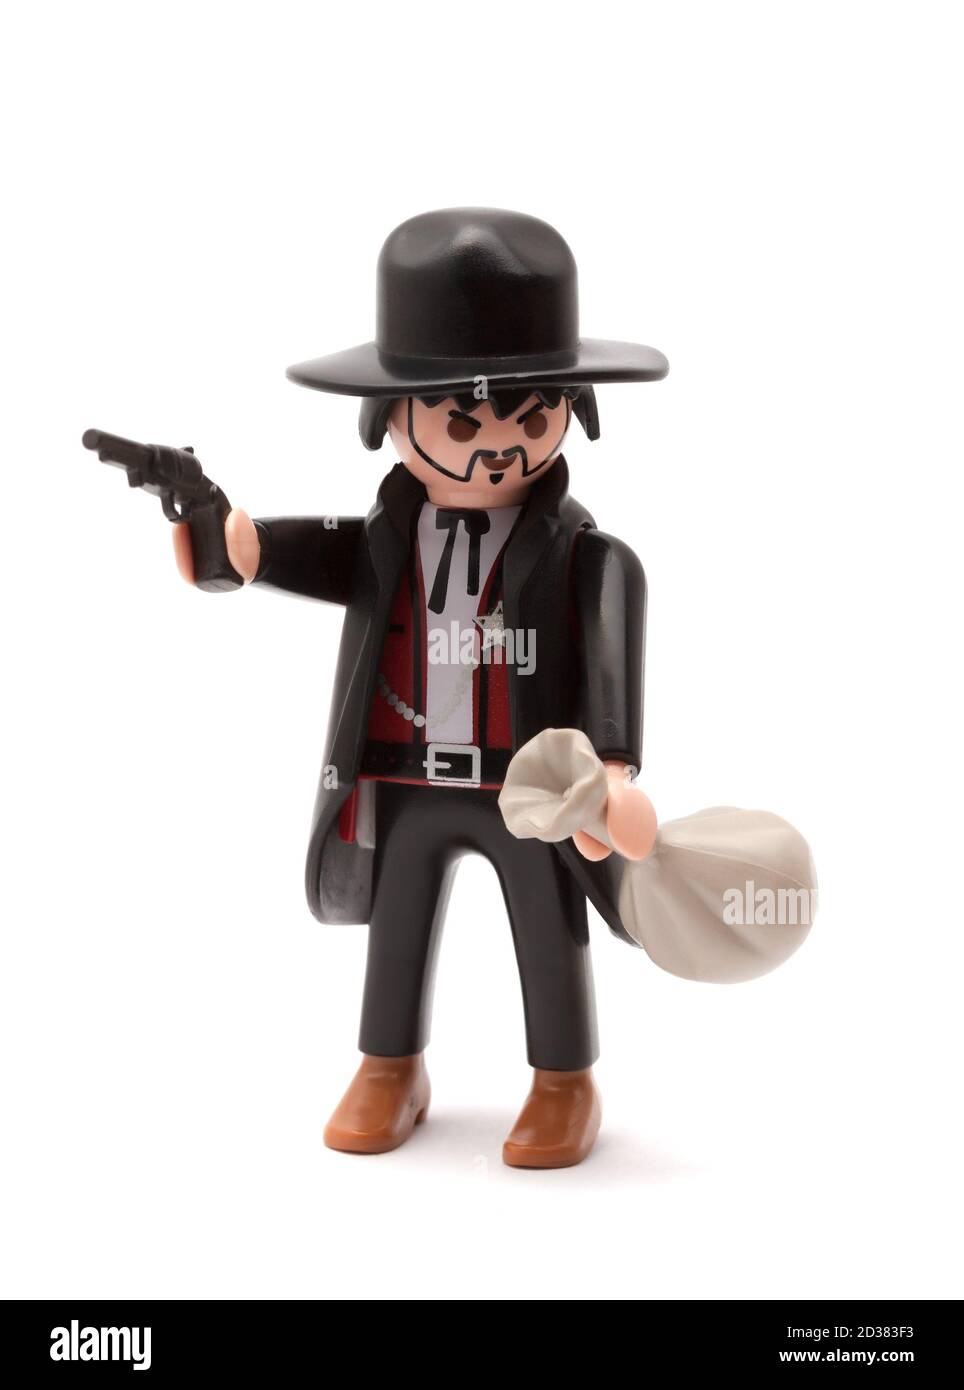 Playmobil Western Thief Figure isolated on white background Stock Photo